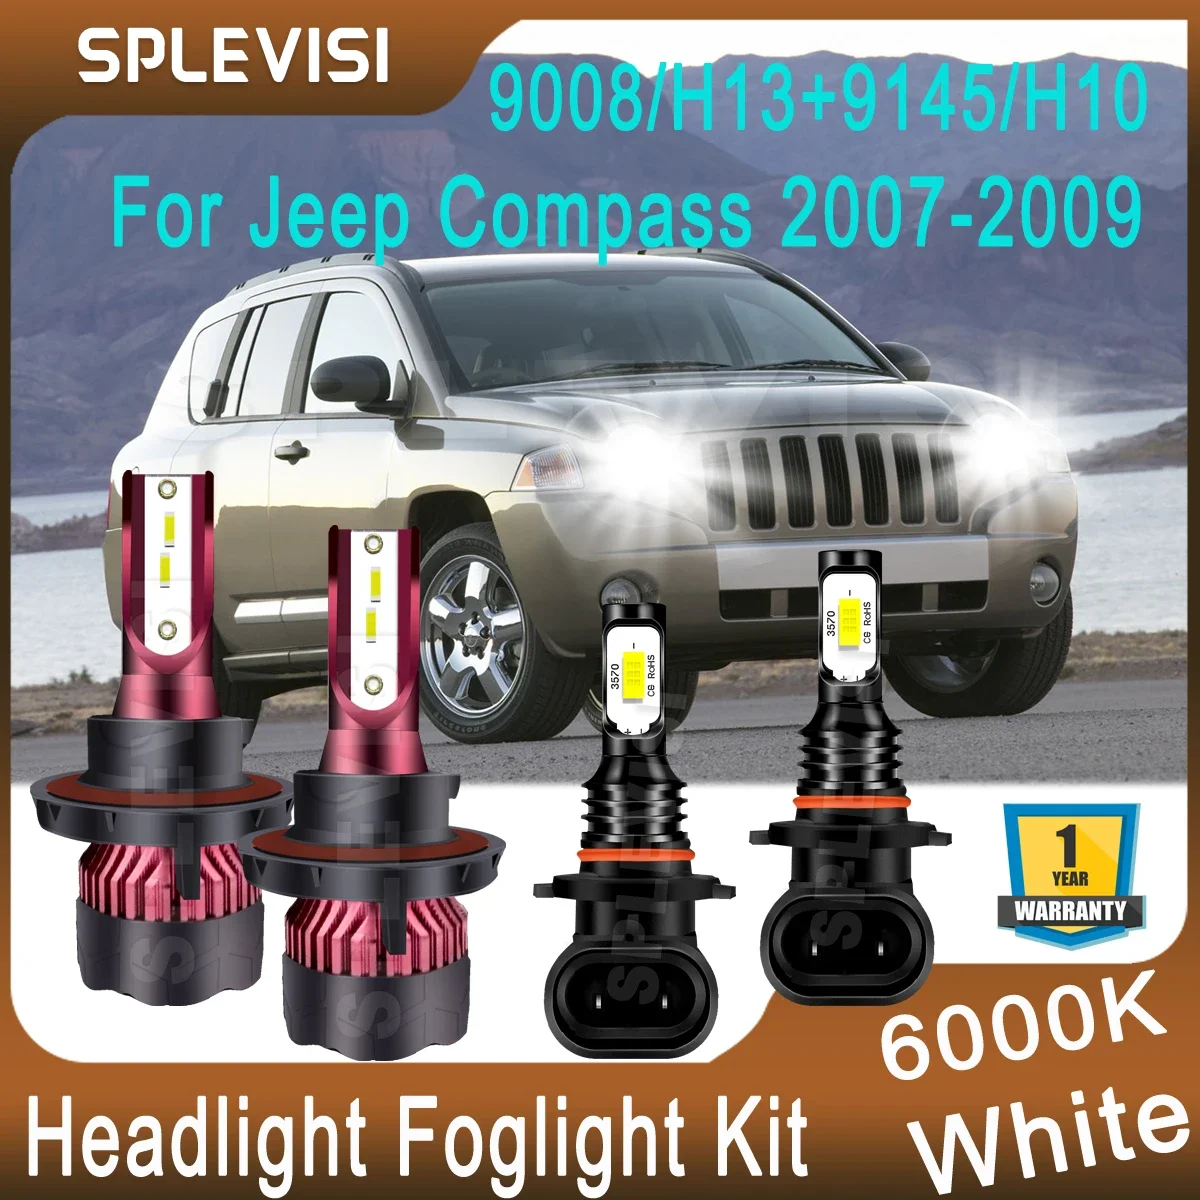 

Upgrade CSP Chips Bright White Kit For Jeep Compass 2007 2008 2009 Replace High Low Beam 9008/H13 Foglamp 9145/H10 Combo Bulbs